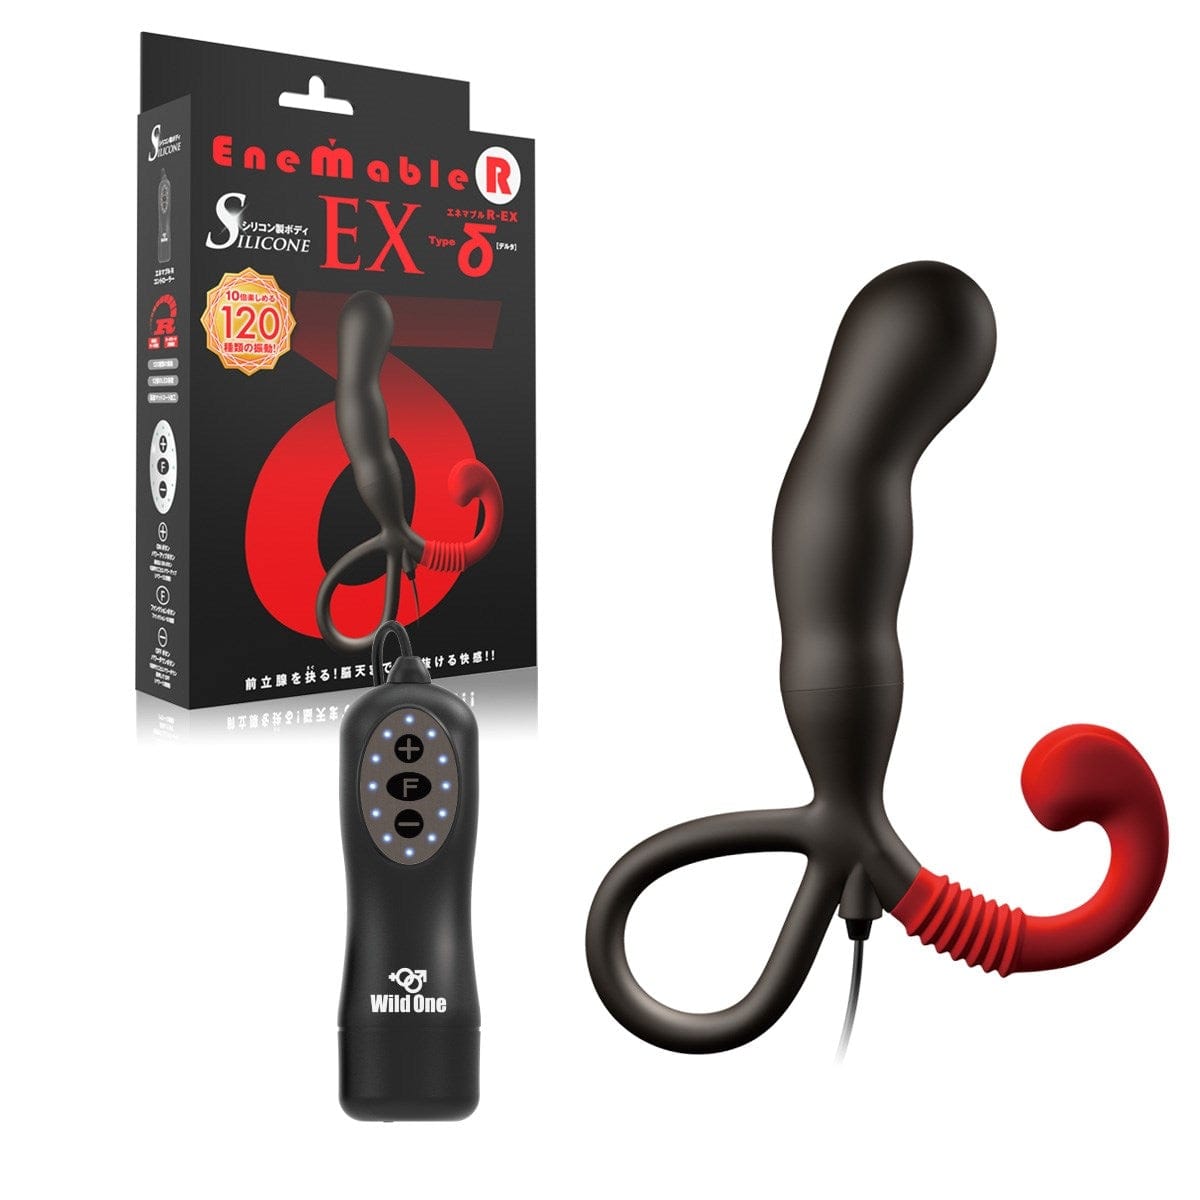 Wild One - Enemable R EX Type δ Delta Remote Control Prostate Massager (Black) Remote Control Anal Plug (Vibration) Non Rechargeable 621271671 CherryAffairs